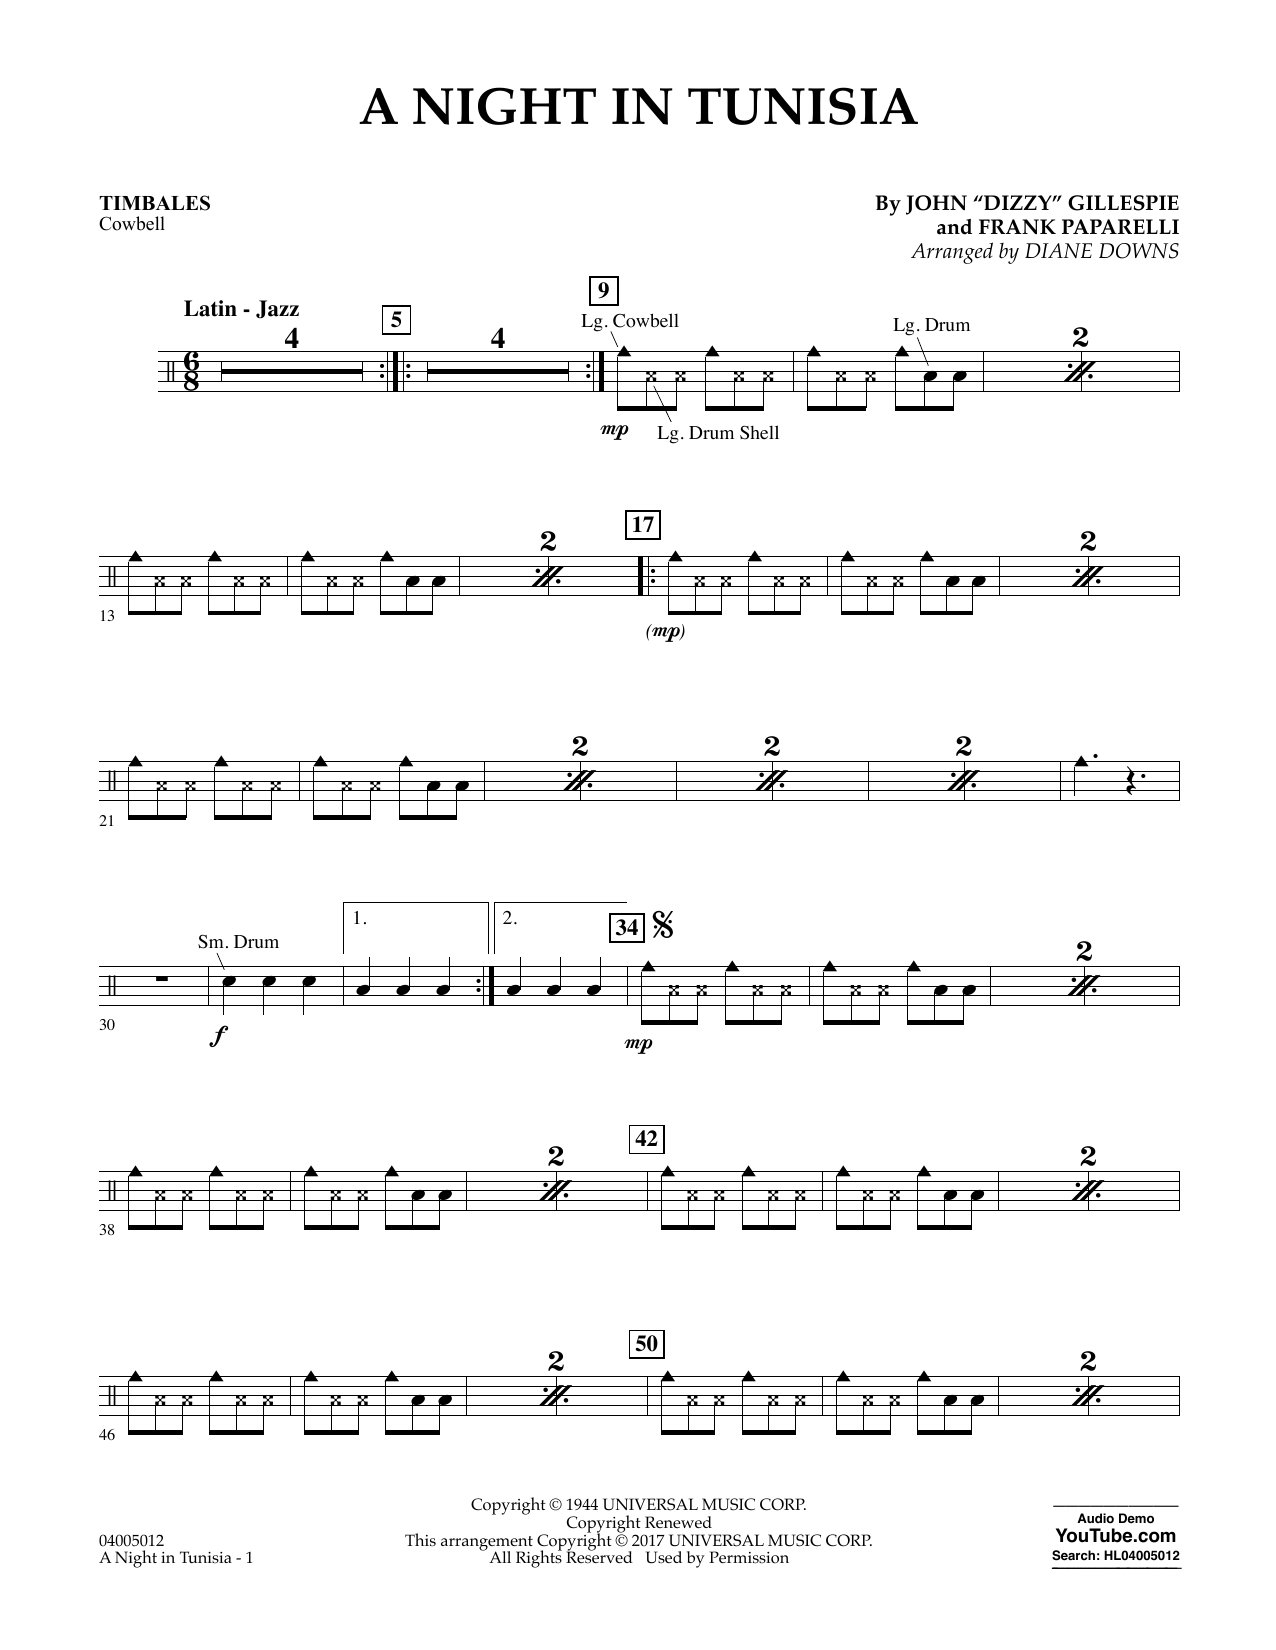 Download Diane Downs A Night in Tunisia - Timbales sheet music and printable PDF score & Jazz music notes